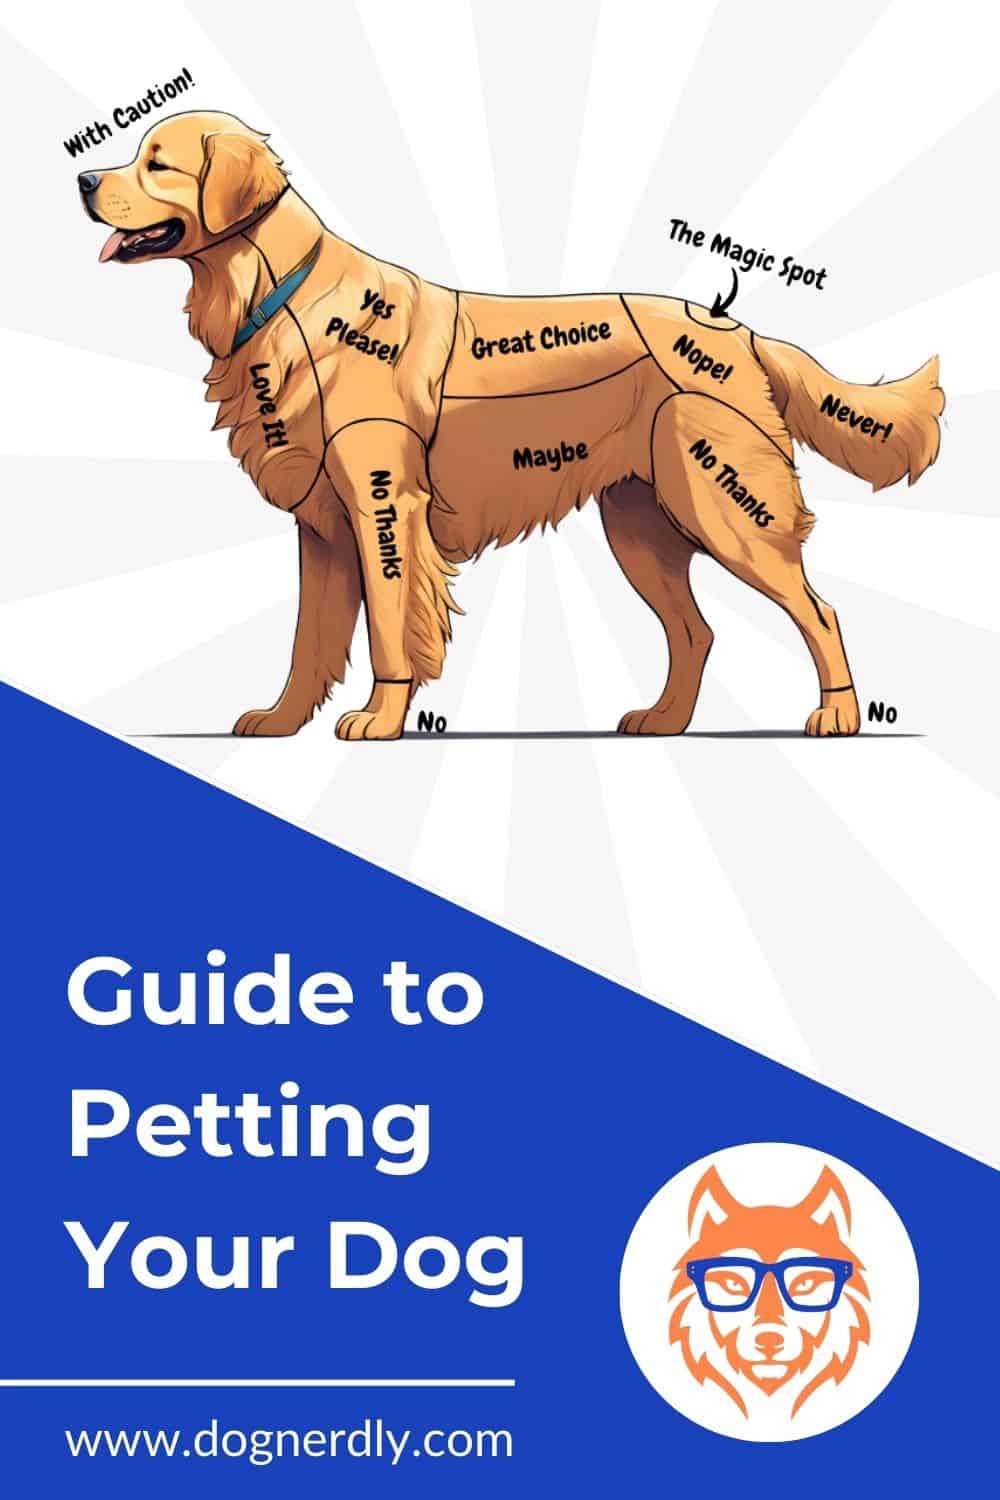 Where to Pet a Dog Safely: Understanding Dog Petting Zones